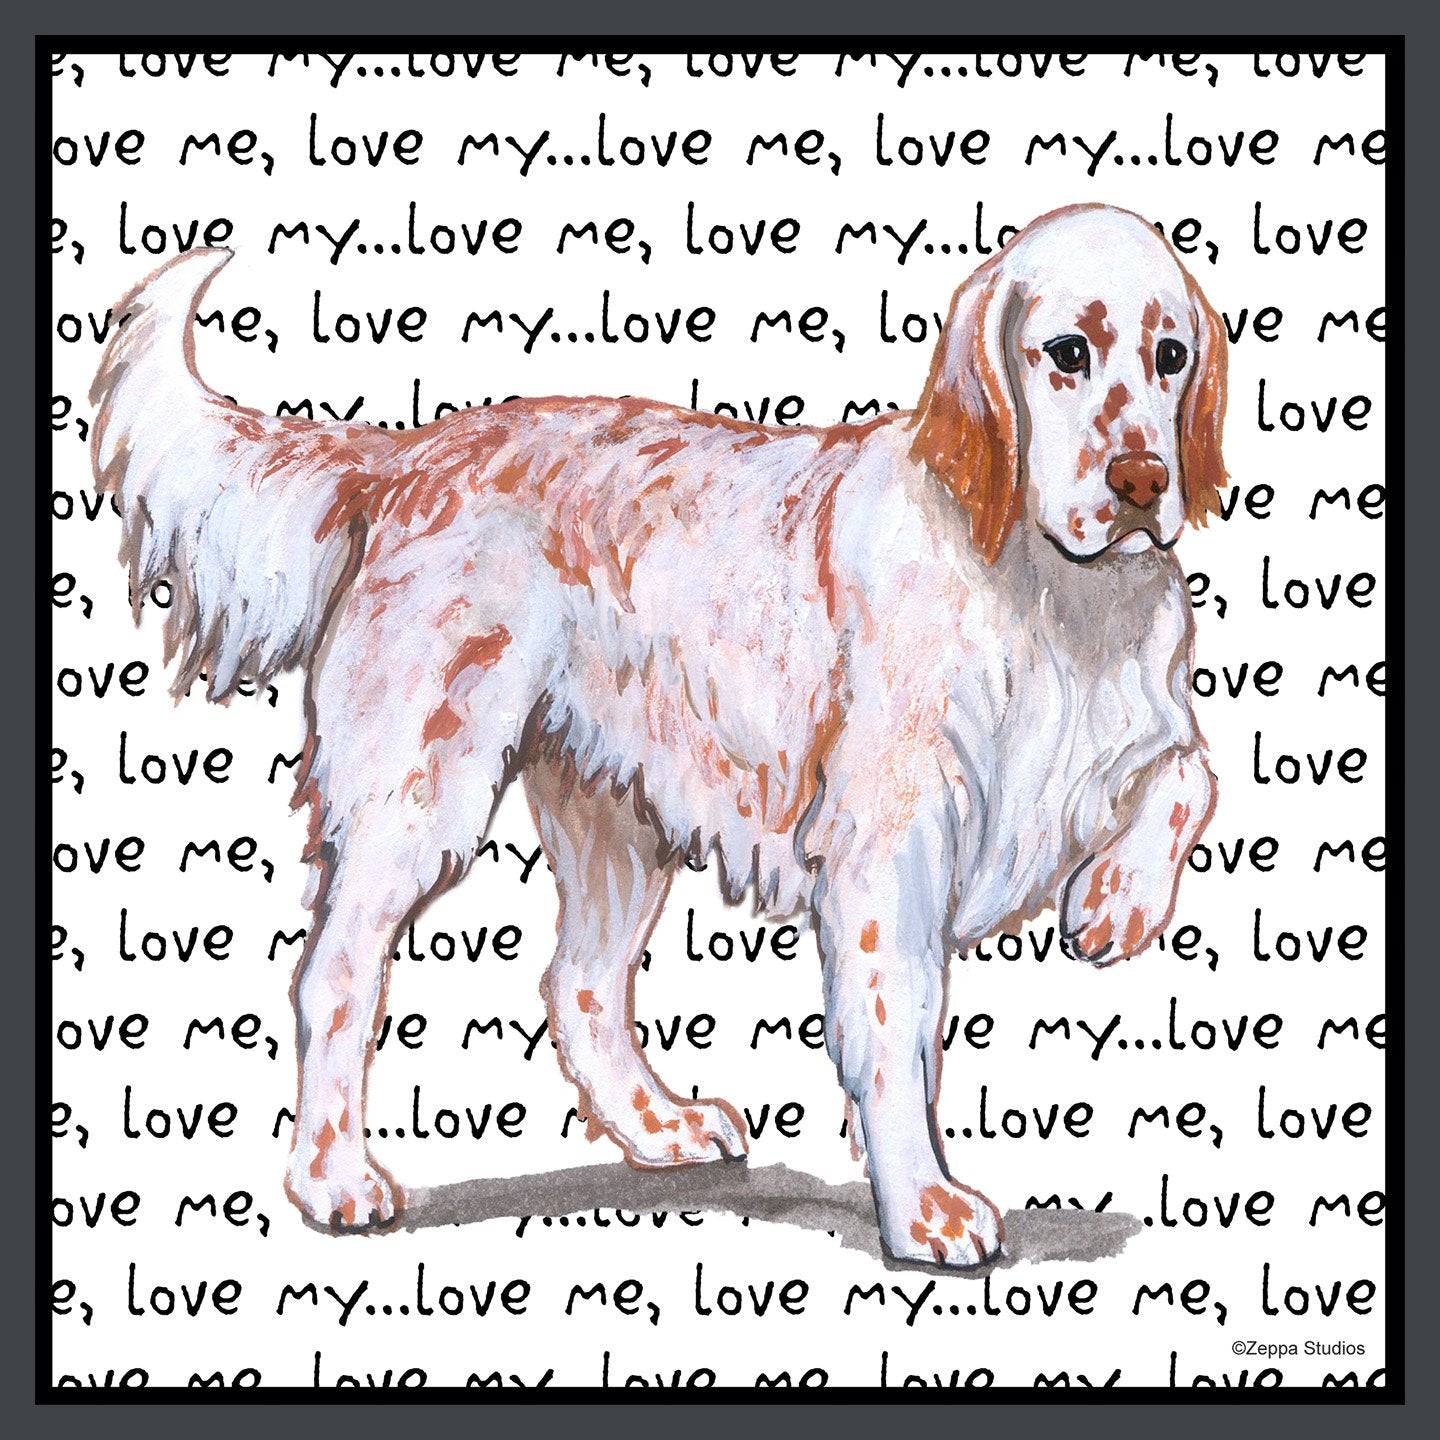 English Setter Love Text - Women's Fitted T-Shirt